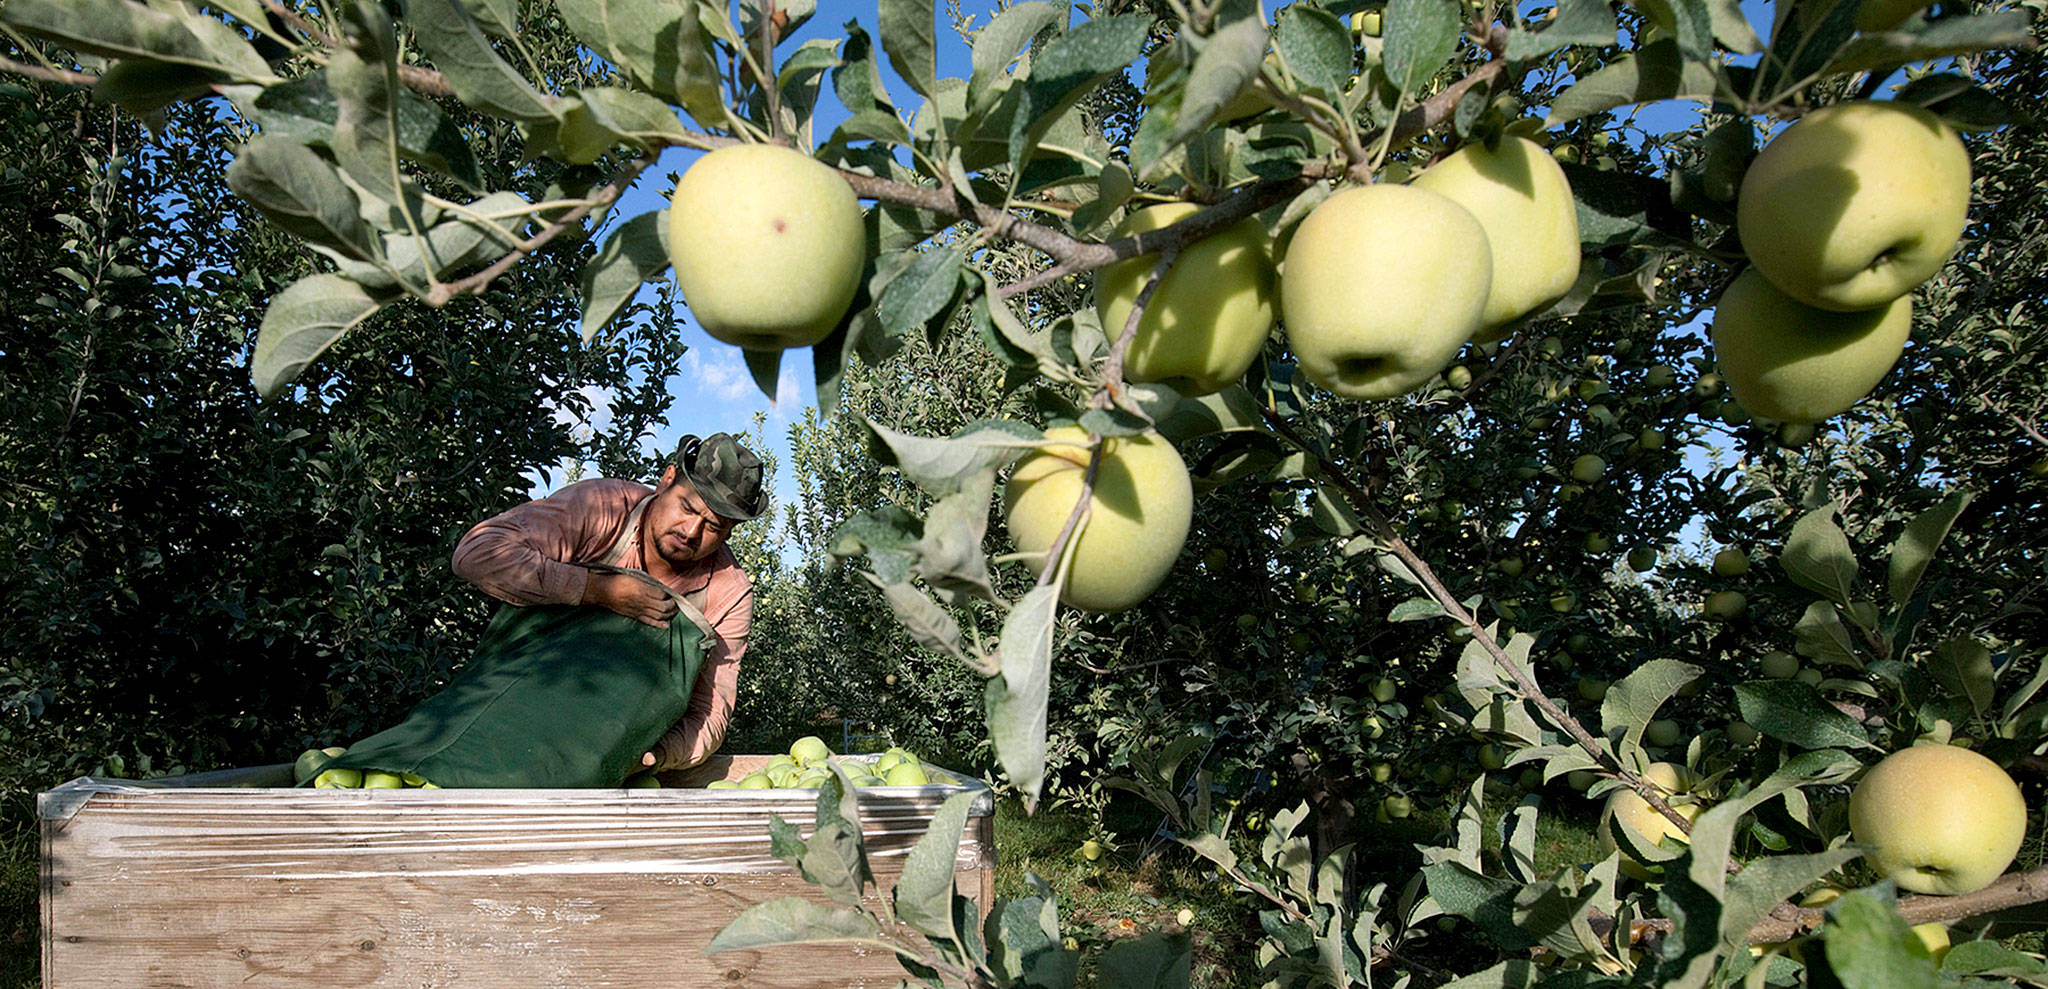 Sergio Garcia empties a bag of just-picked golden delicious apples into a bin at a Valicoff Fruit Company orchard near Wapato, Washington, in 2013. (Gordon King/Yakima Herald-Republic via AP, File)